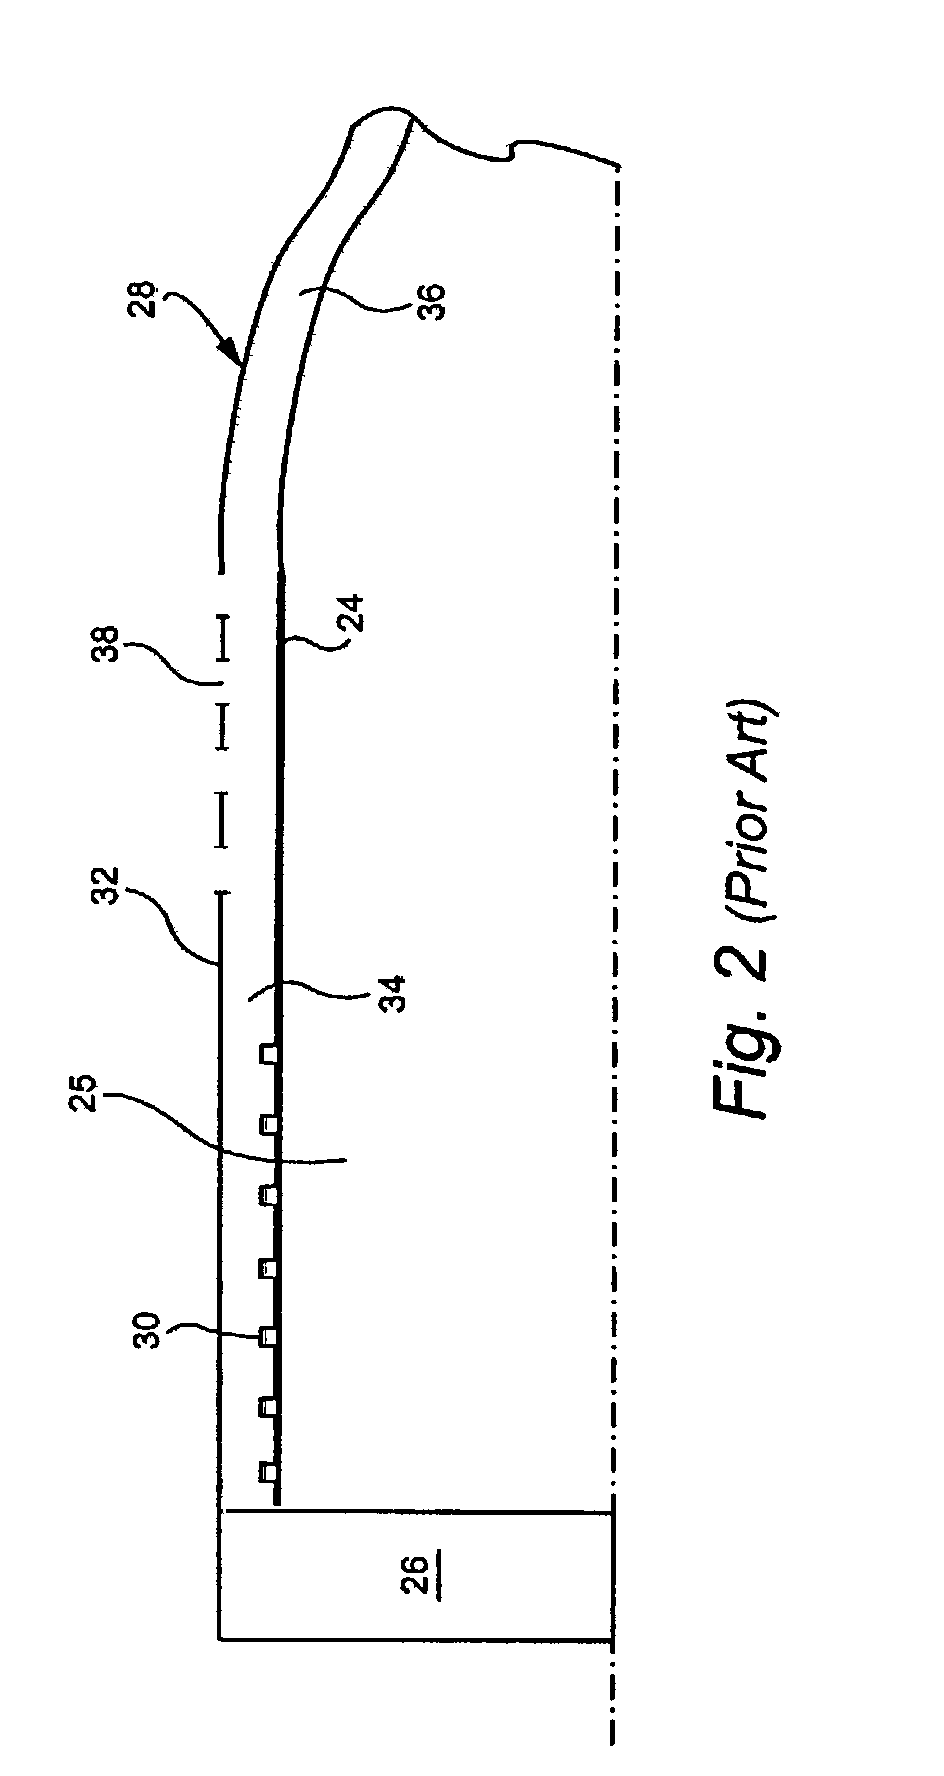 Combustor liner with inverted turbulators